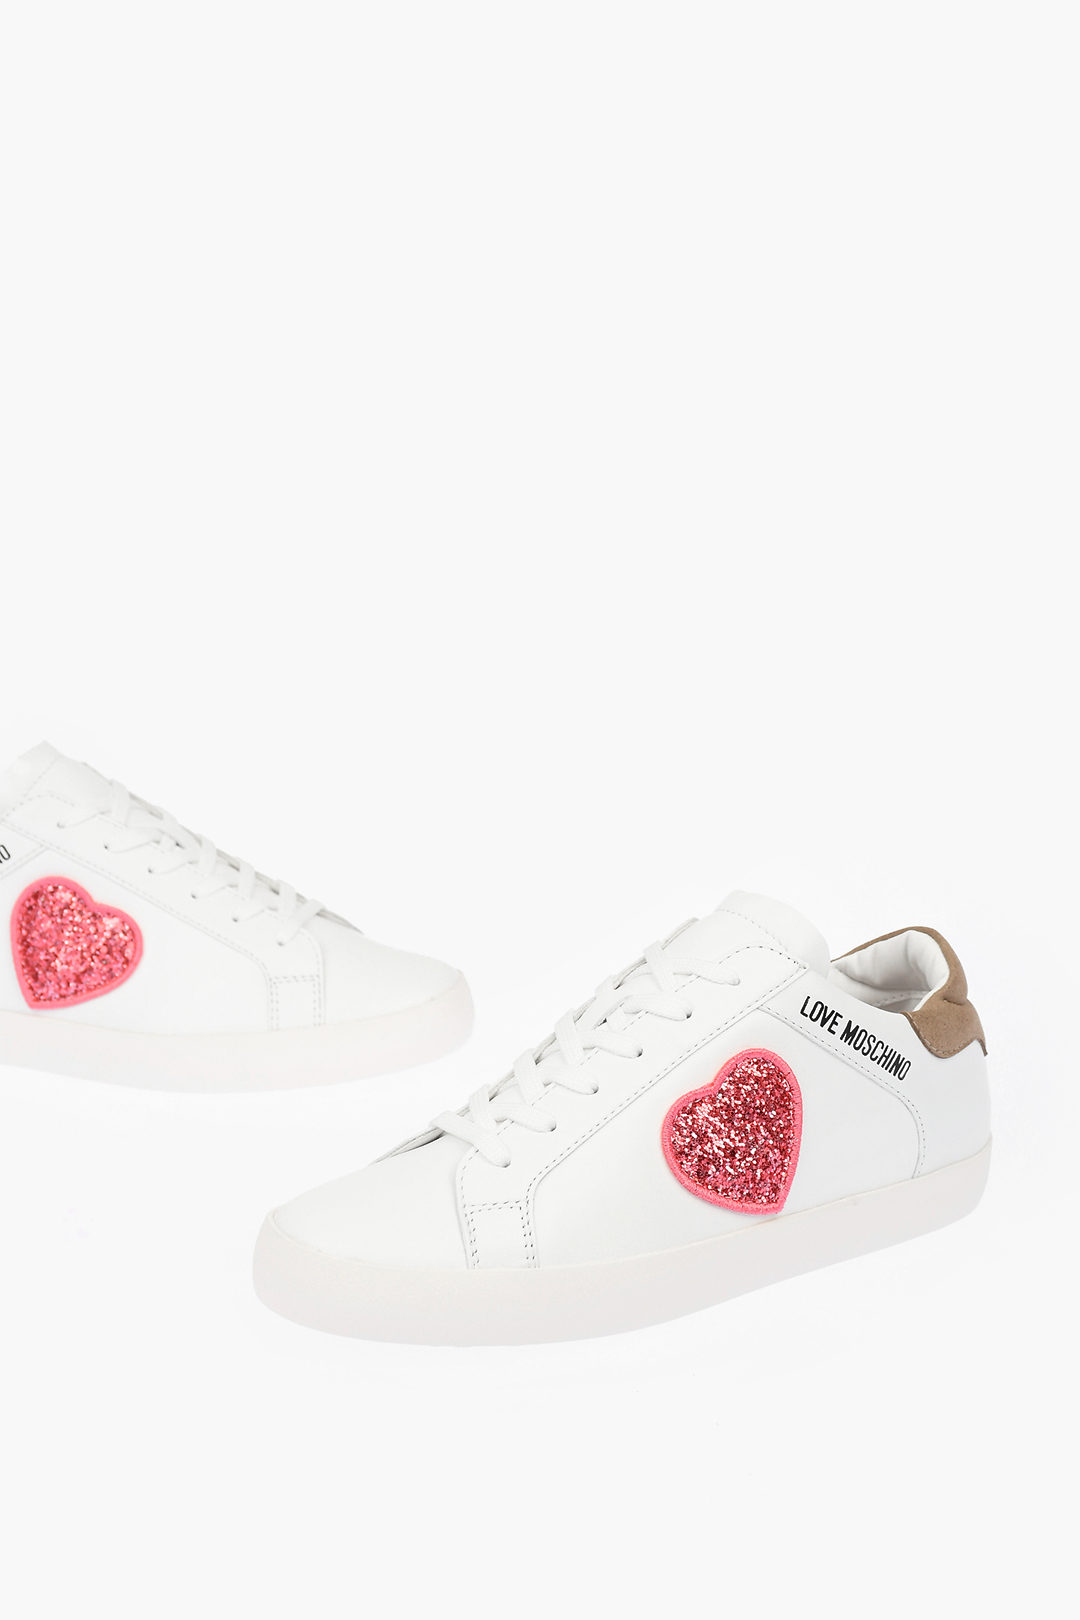 Begrip Amfibisch verdieping Moschino LOVE leather low top sneakers with glitter heart women - Glamood  Outlet